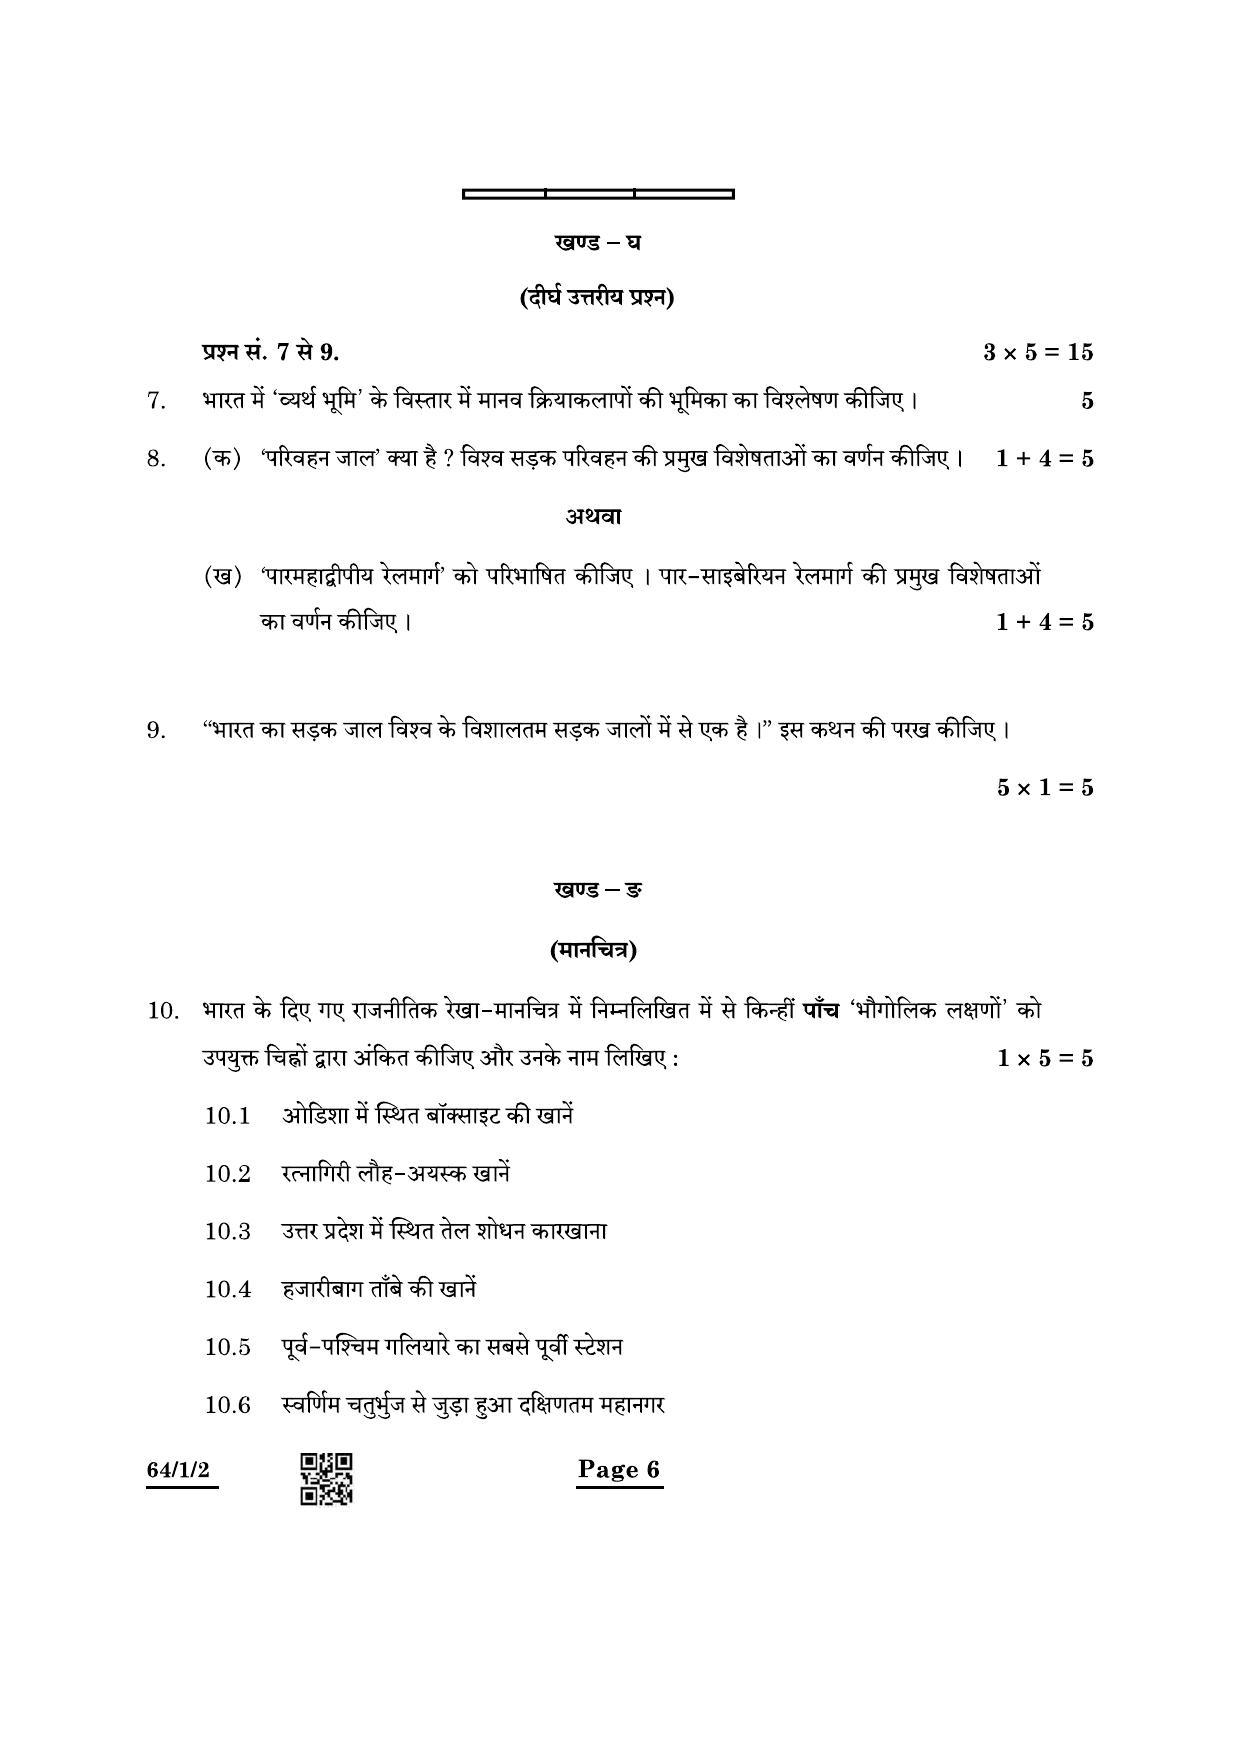 CBSE Class 12 64-1-2 Geography 2022 Question Paper - Page 6